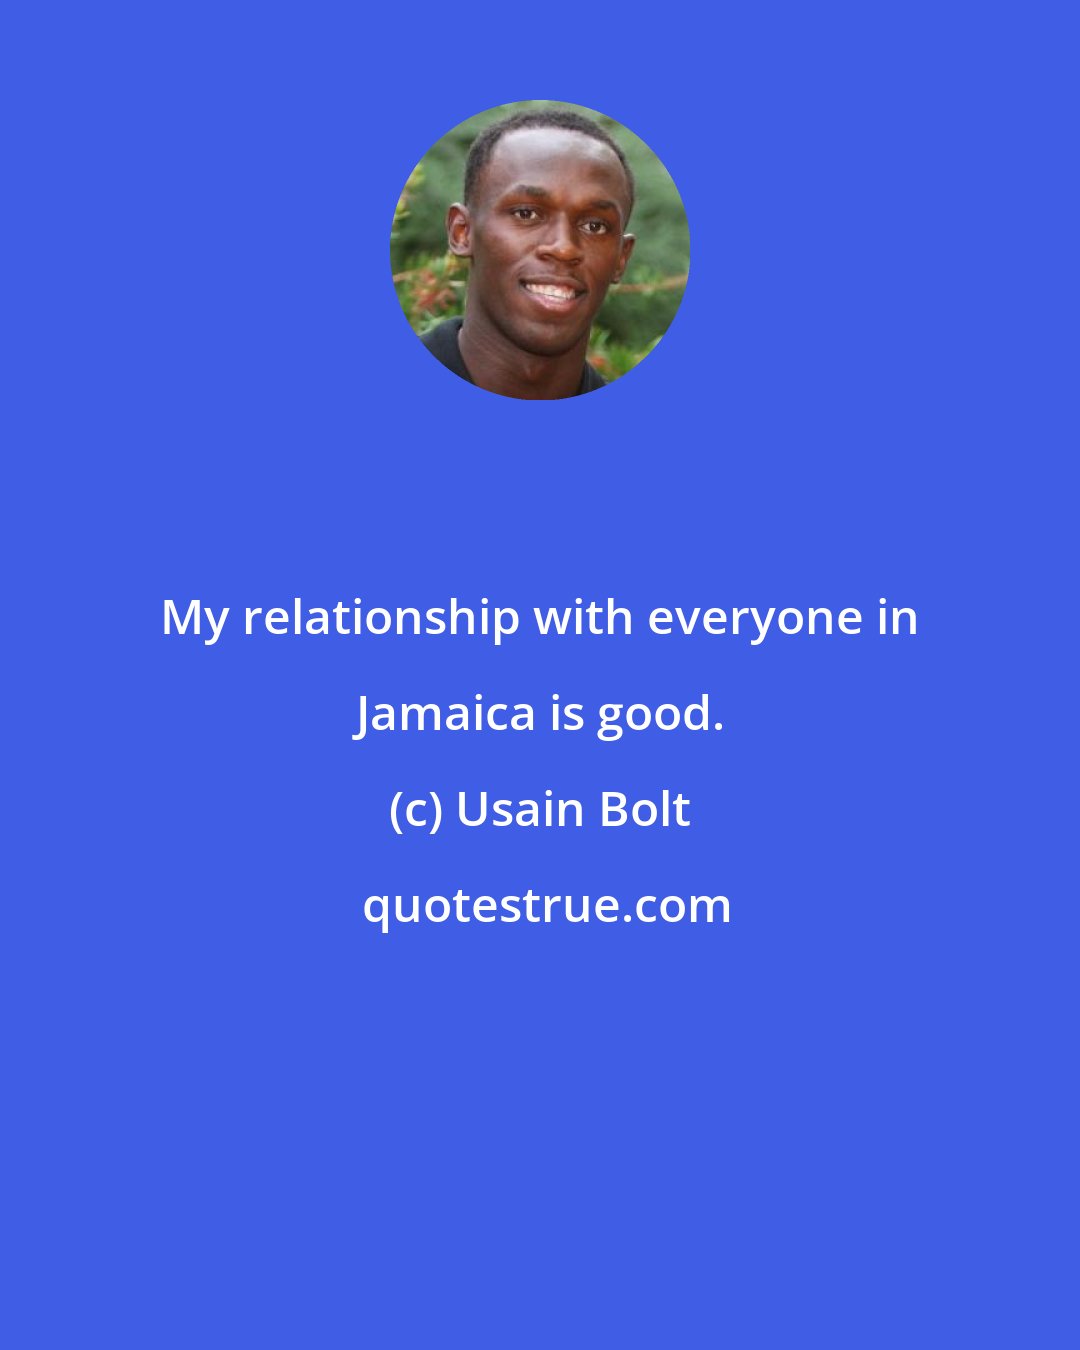 Usain Bolt: My relationship with everyone in Jamaica is good.